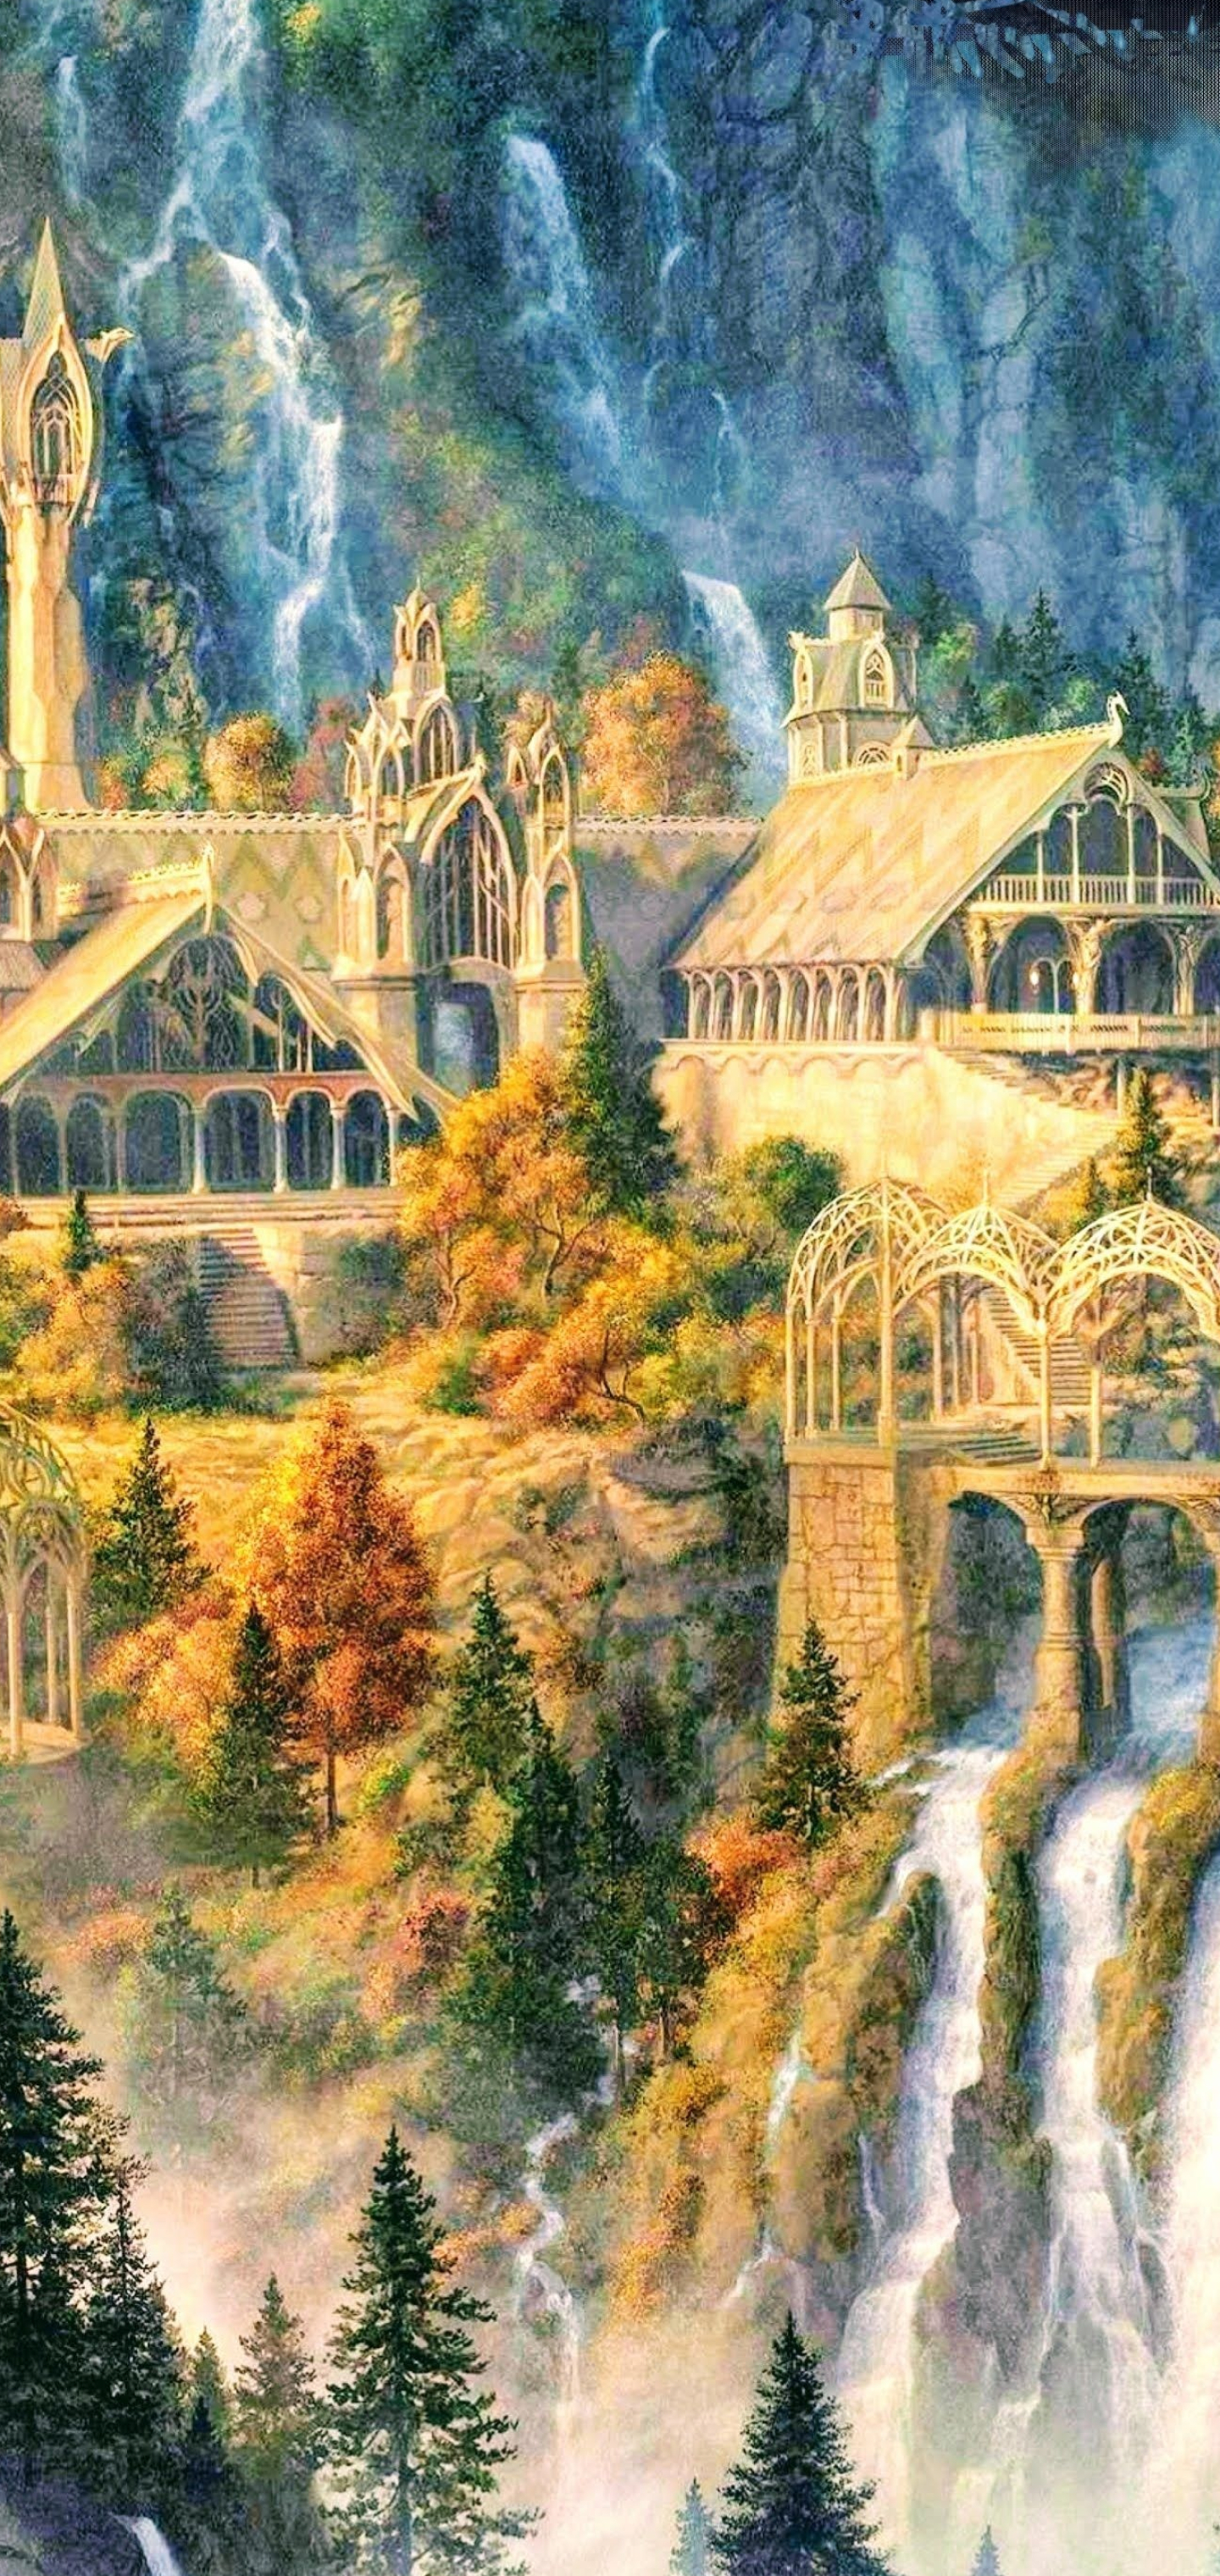 Rivendell, Bear Cave wallpapers, Middle-earth, Lord of the Rings, 1440x3040 HD Handy